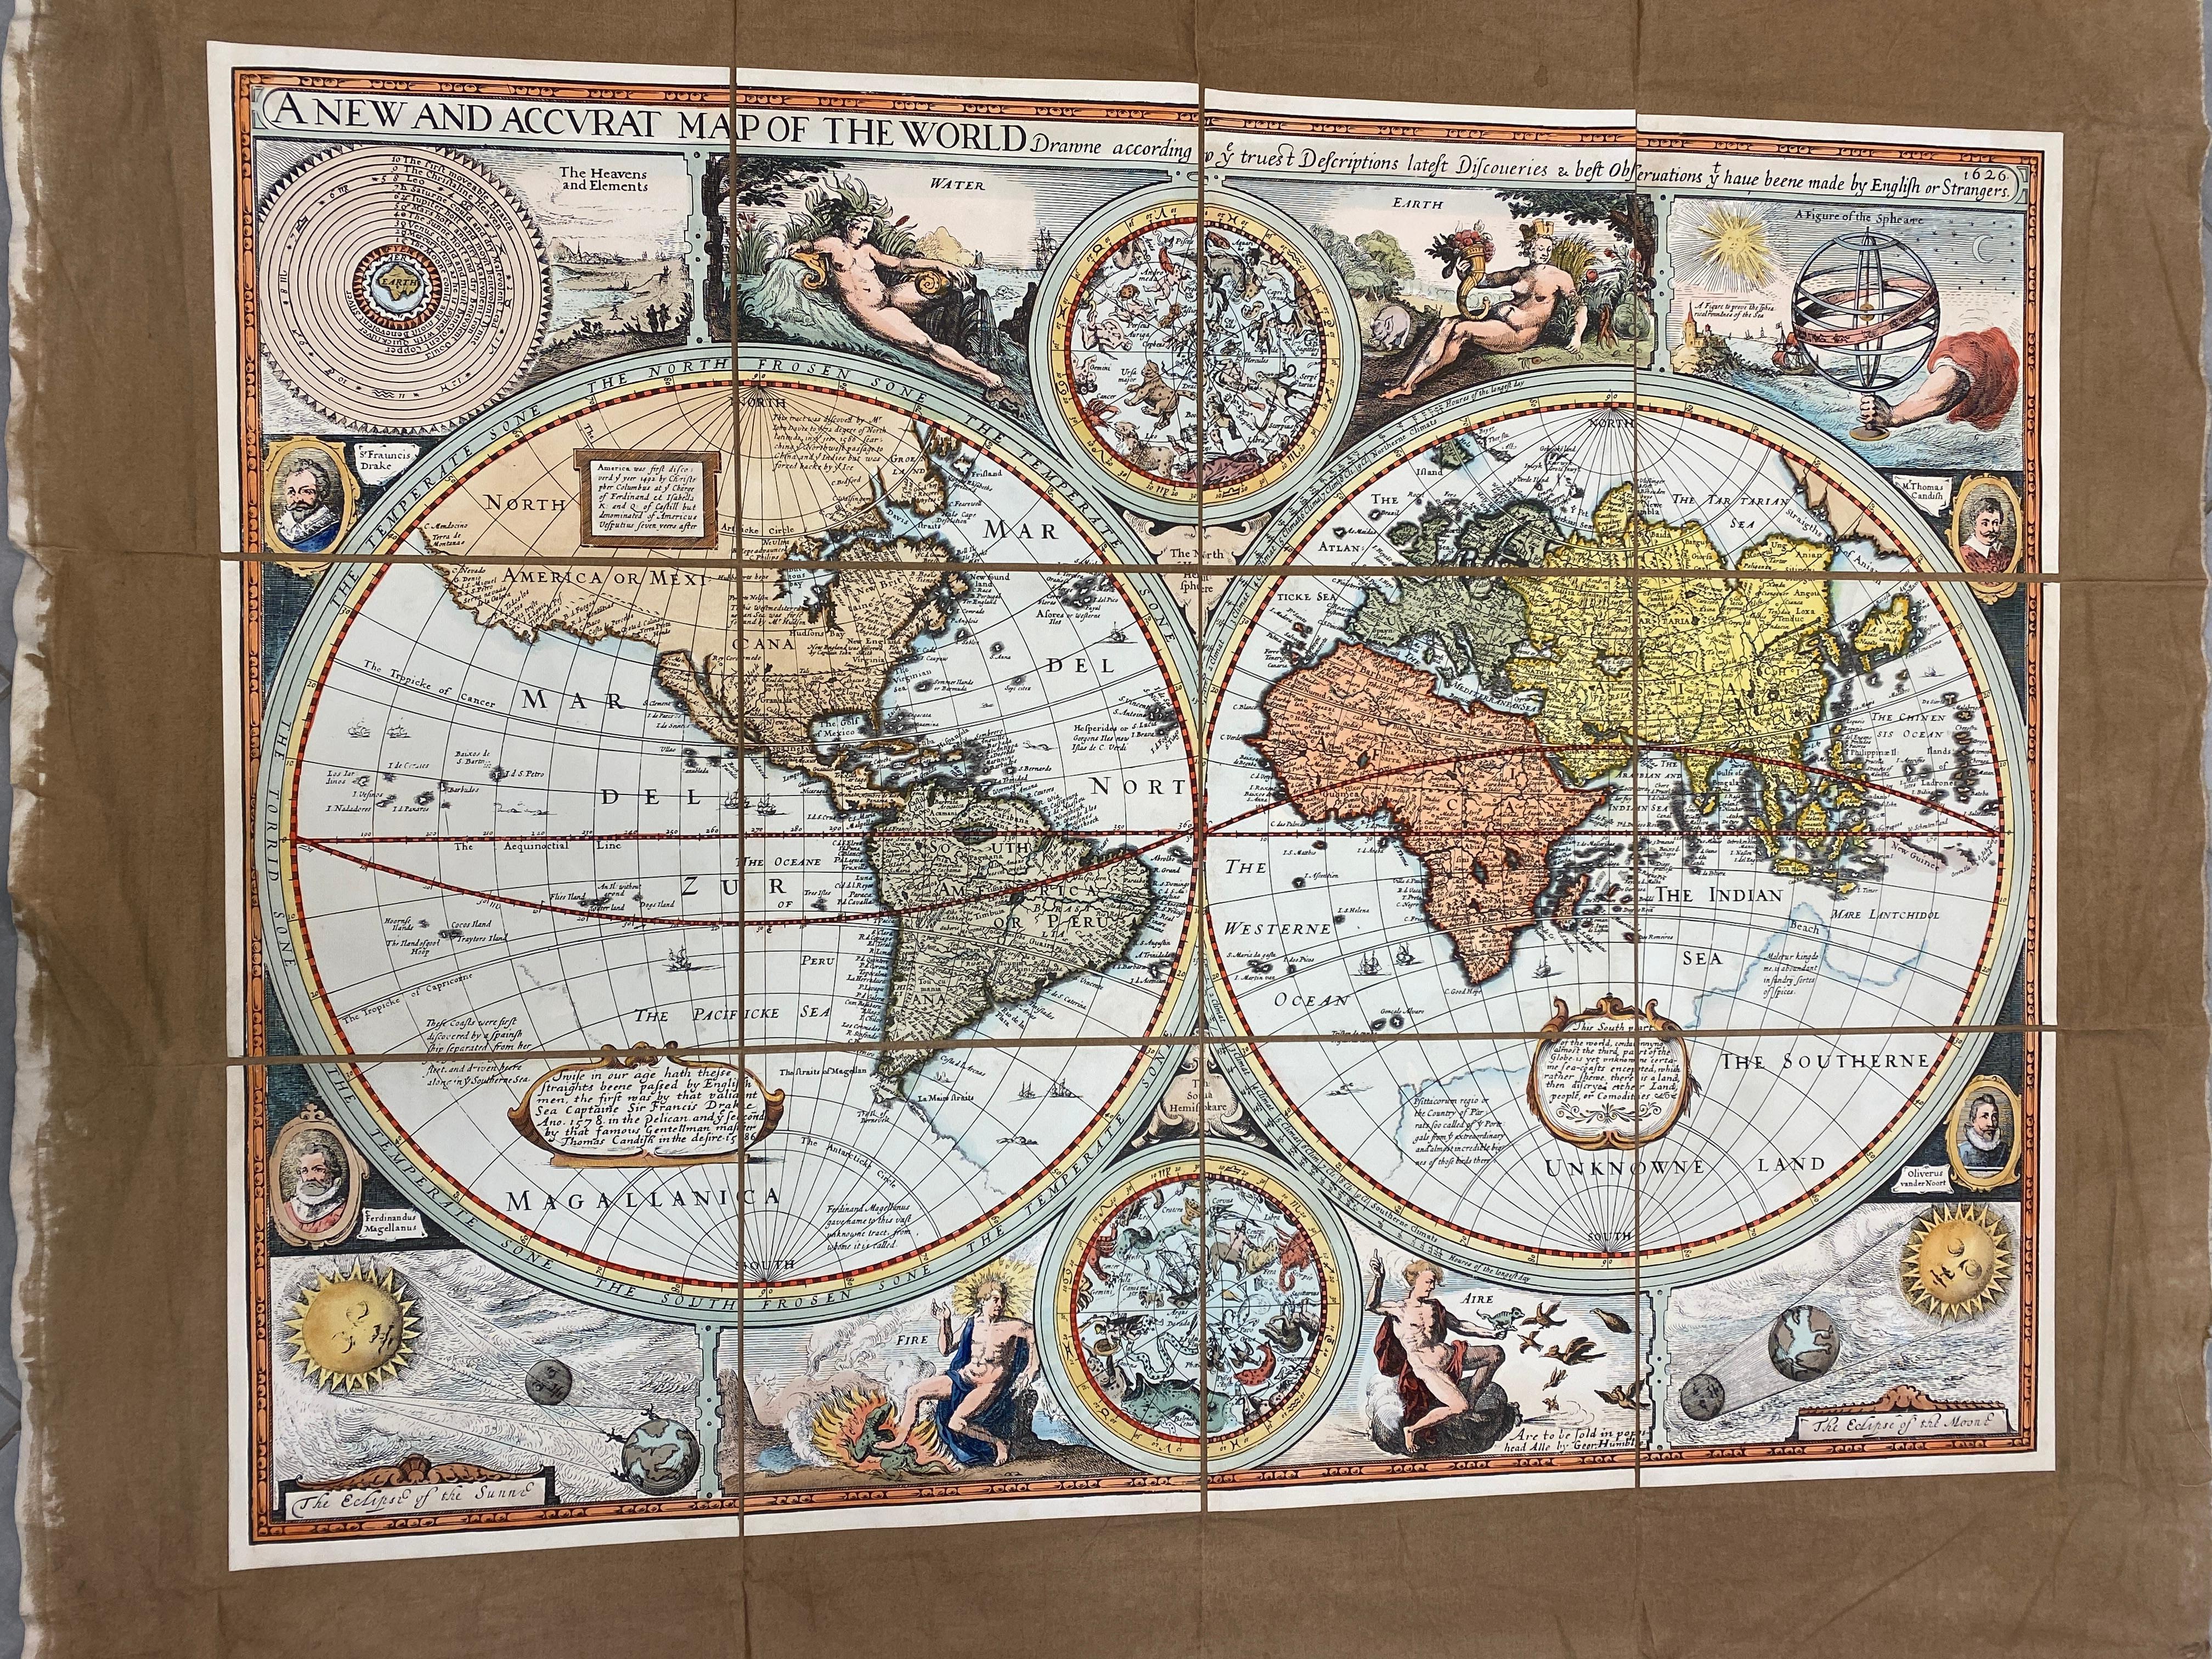 Beautiful reproduction of an antique English map showing th Planisfere, with astral hemisfere,  made in 1629.
We can see with what mastery of joints and vivid colours the author depicts lands, costellations, maps and and allegories of the 4